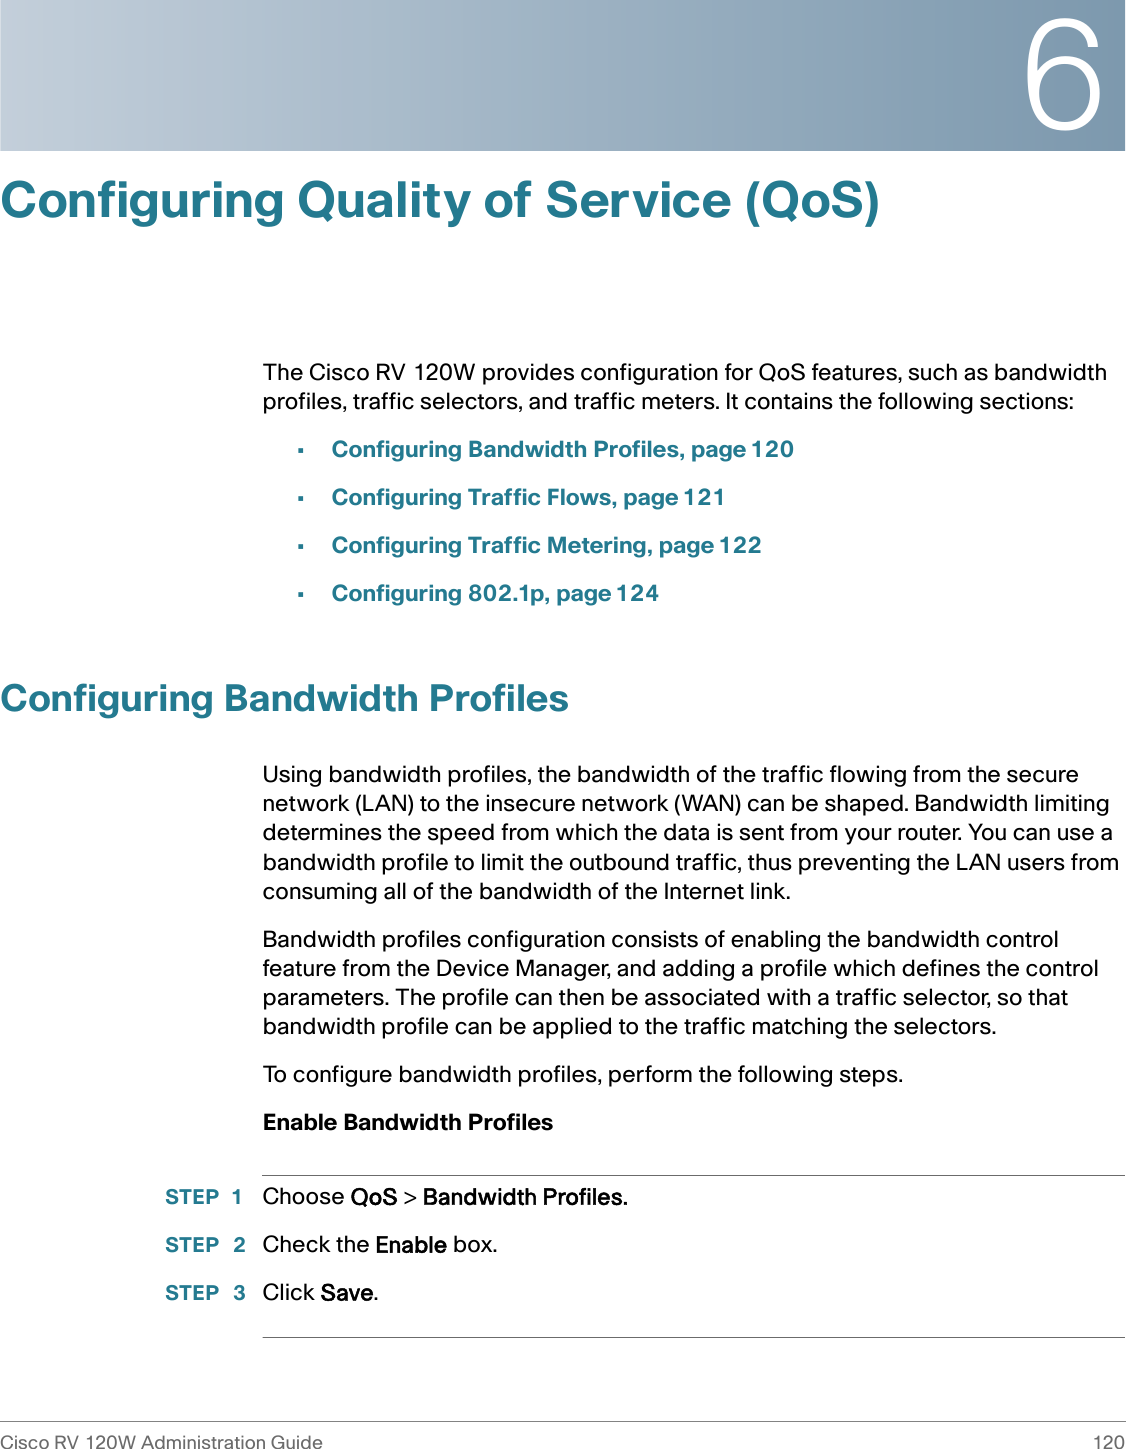 6Cisco RV 120W Administration Guide 120 Configuring Quality of Service (QoS)The Cisco RV 120W provides configuration for QoS features, such as bandwidth profiles, traffic selectors, and traffic meters. It contains the following sections:•Configuring Bandwidth Profiles, page 120•Configuring Traffic Flows, page 121•Configuring Traffic Metering, page 122•Configuring 802.1p, page 124Configuring Bandwidth ProfilesUsing bandwidth profiles, the bandwidth of the traffic flowing from the secure network (LAN) to the insecure network (WAN) can be shaped. Bandwidth limiting determines the speed from which the data is sent from your router. You can use a bandwidth profile to limit the outbound traffic, thus preventing the LAN users from consuming all of the bandwidth of the Internet link. Bandwidth profiles configuration consists of enabling the bandwidth control feature from the Device Manager, and adding a profile which defines the control parameters. The profile can then be associated with a traffic selector, so that bandwidth profile can be applied to the traffic matching the selectors. To configure bandwidth profiles, perform the following steps.Enable Bandwidth ProfilesSTEP 1 Choose QoS &gt; Bandwidth Profiles.STEP  2 Check the Enable box.STEP  3 Click Save.